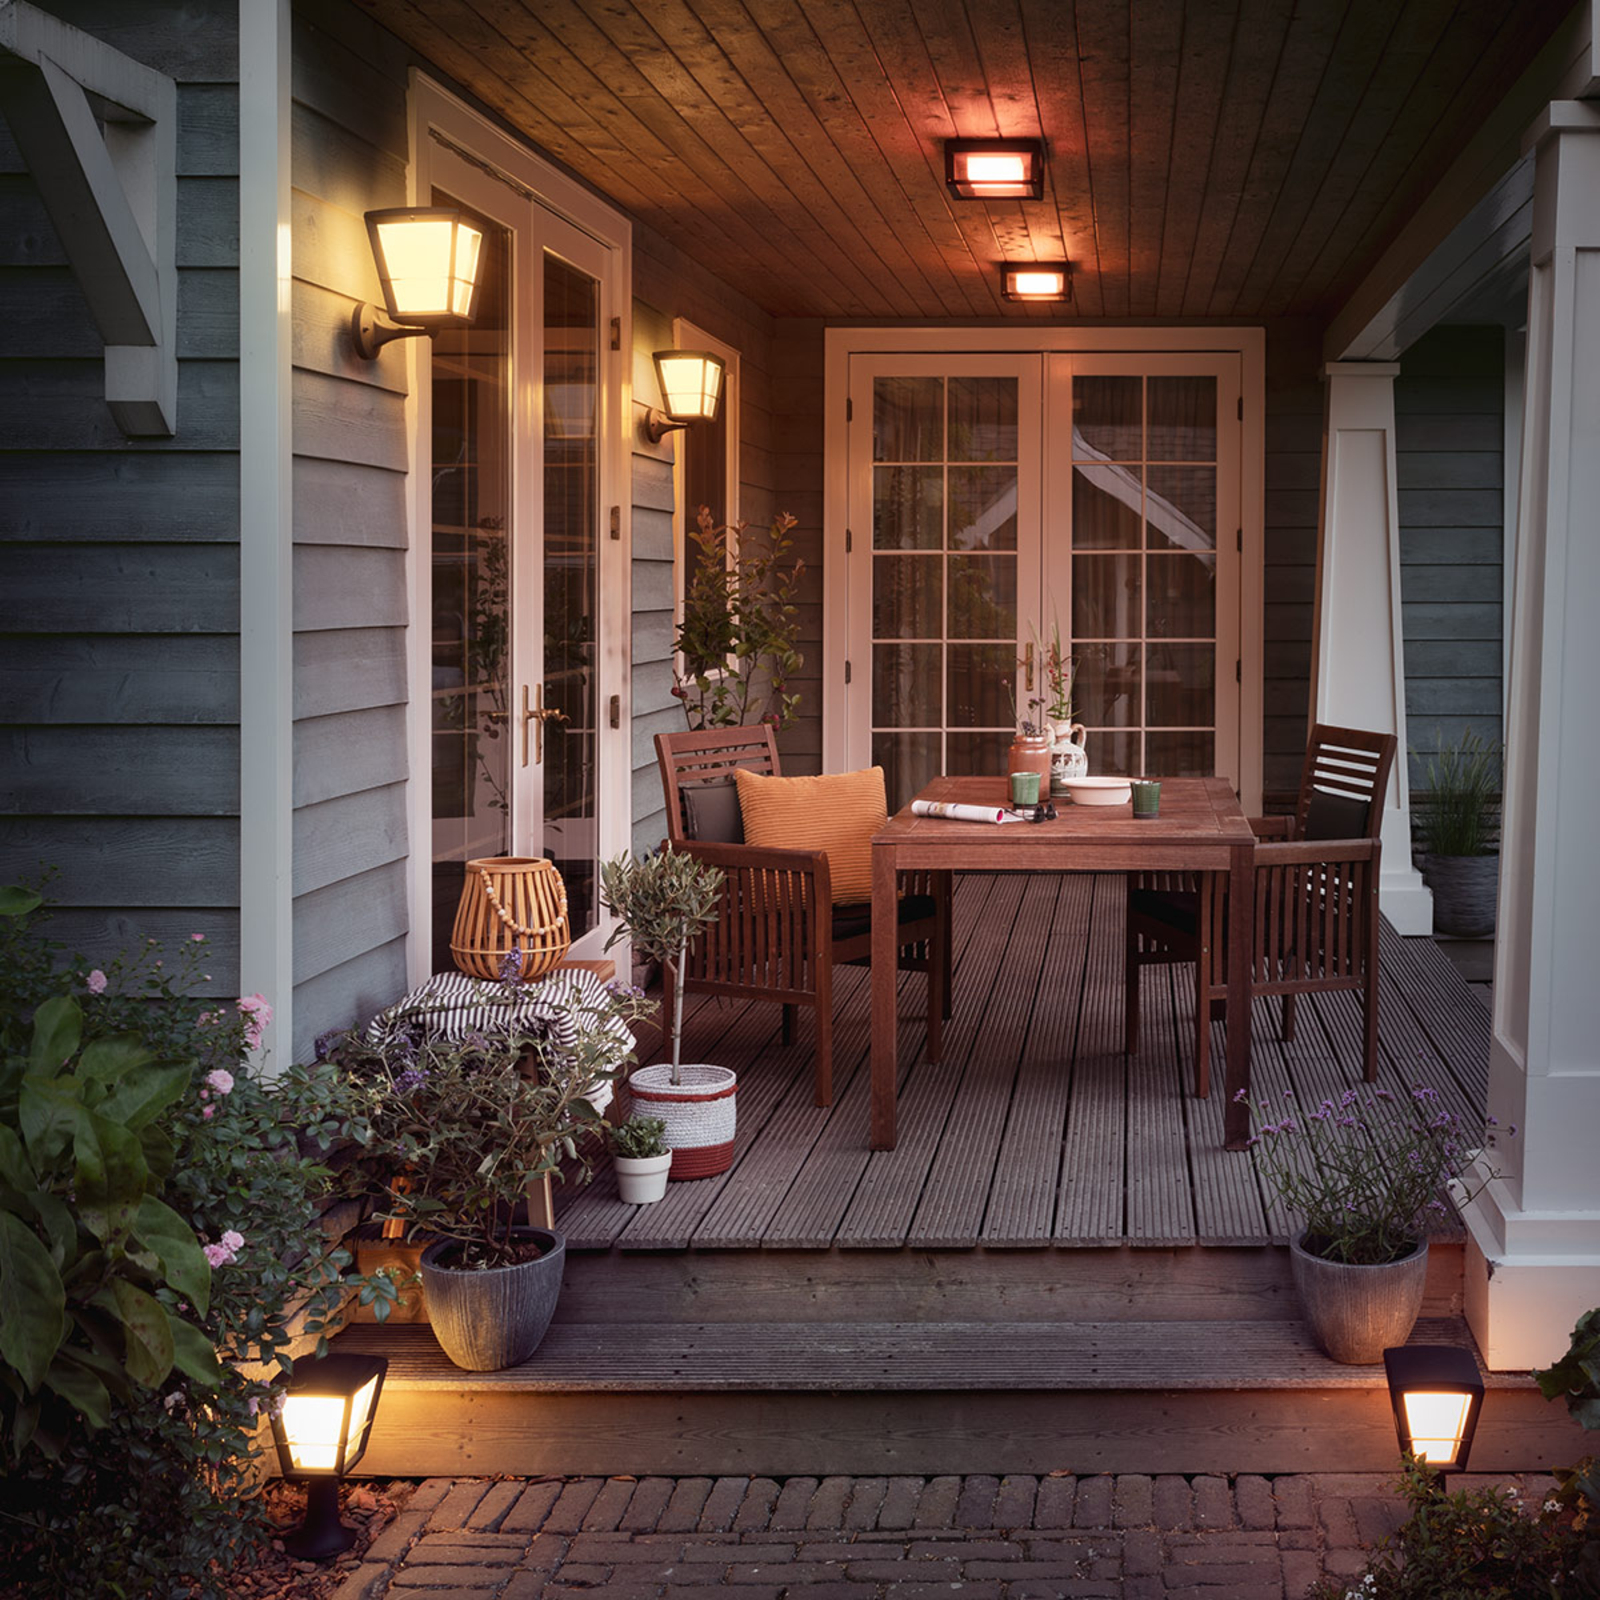 Passief Publiciteit Logisch Philips Hue White+Color Econic LED sokkellamp | Lampen24.be